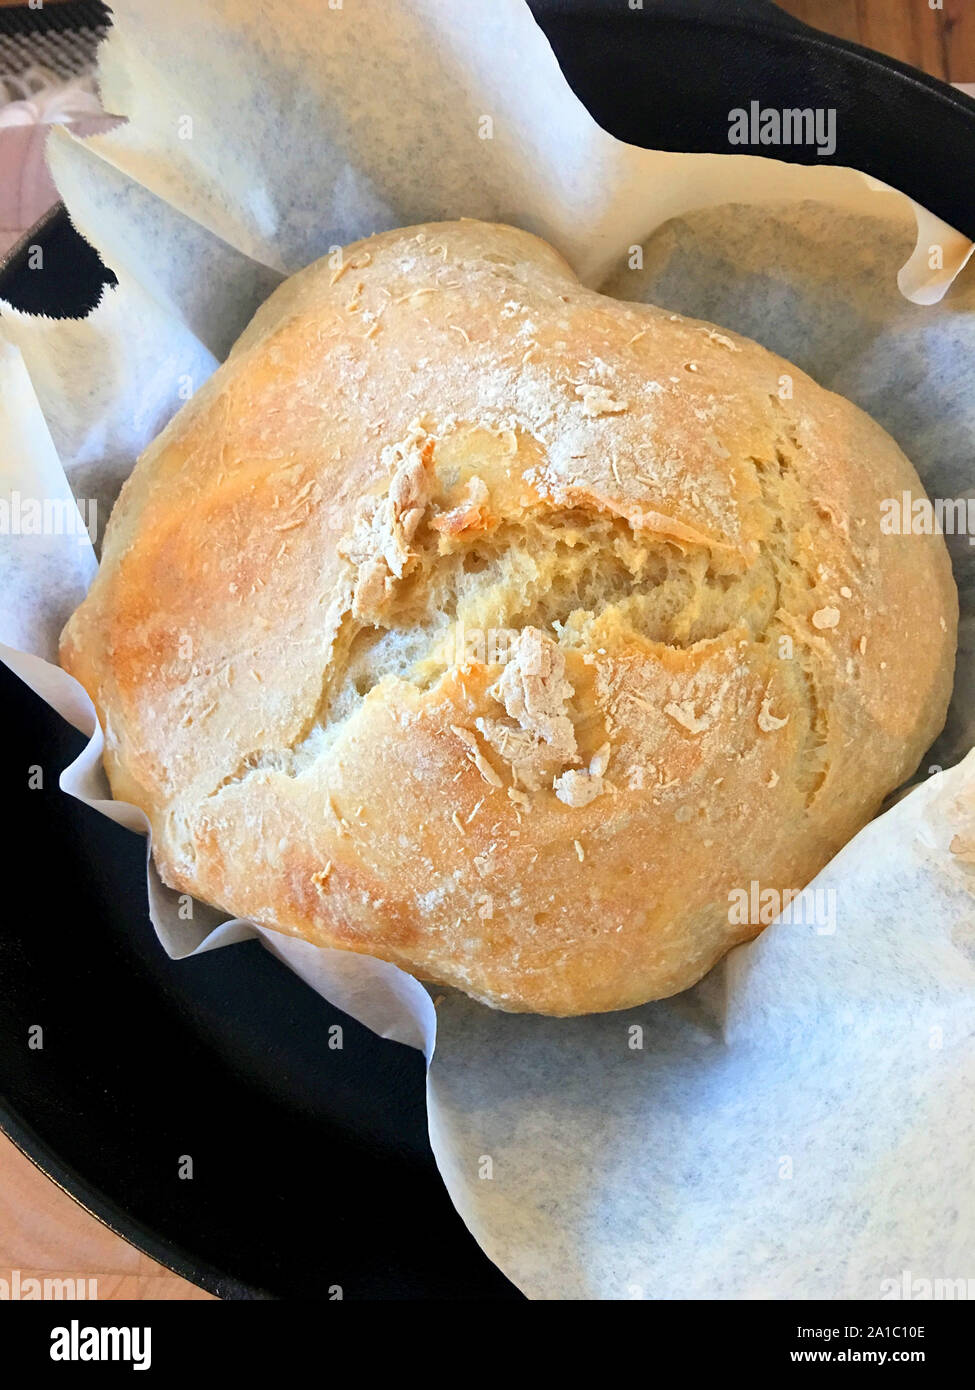 Freshly baked homemade bread just out of the oven Stock Photo